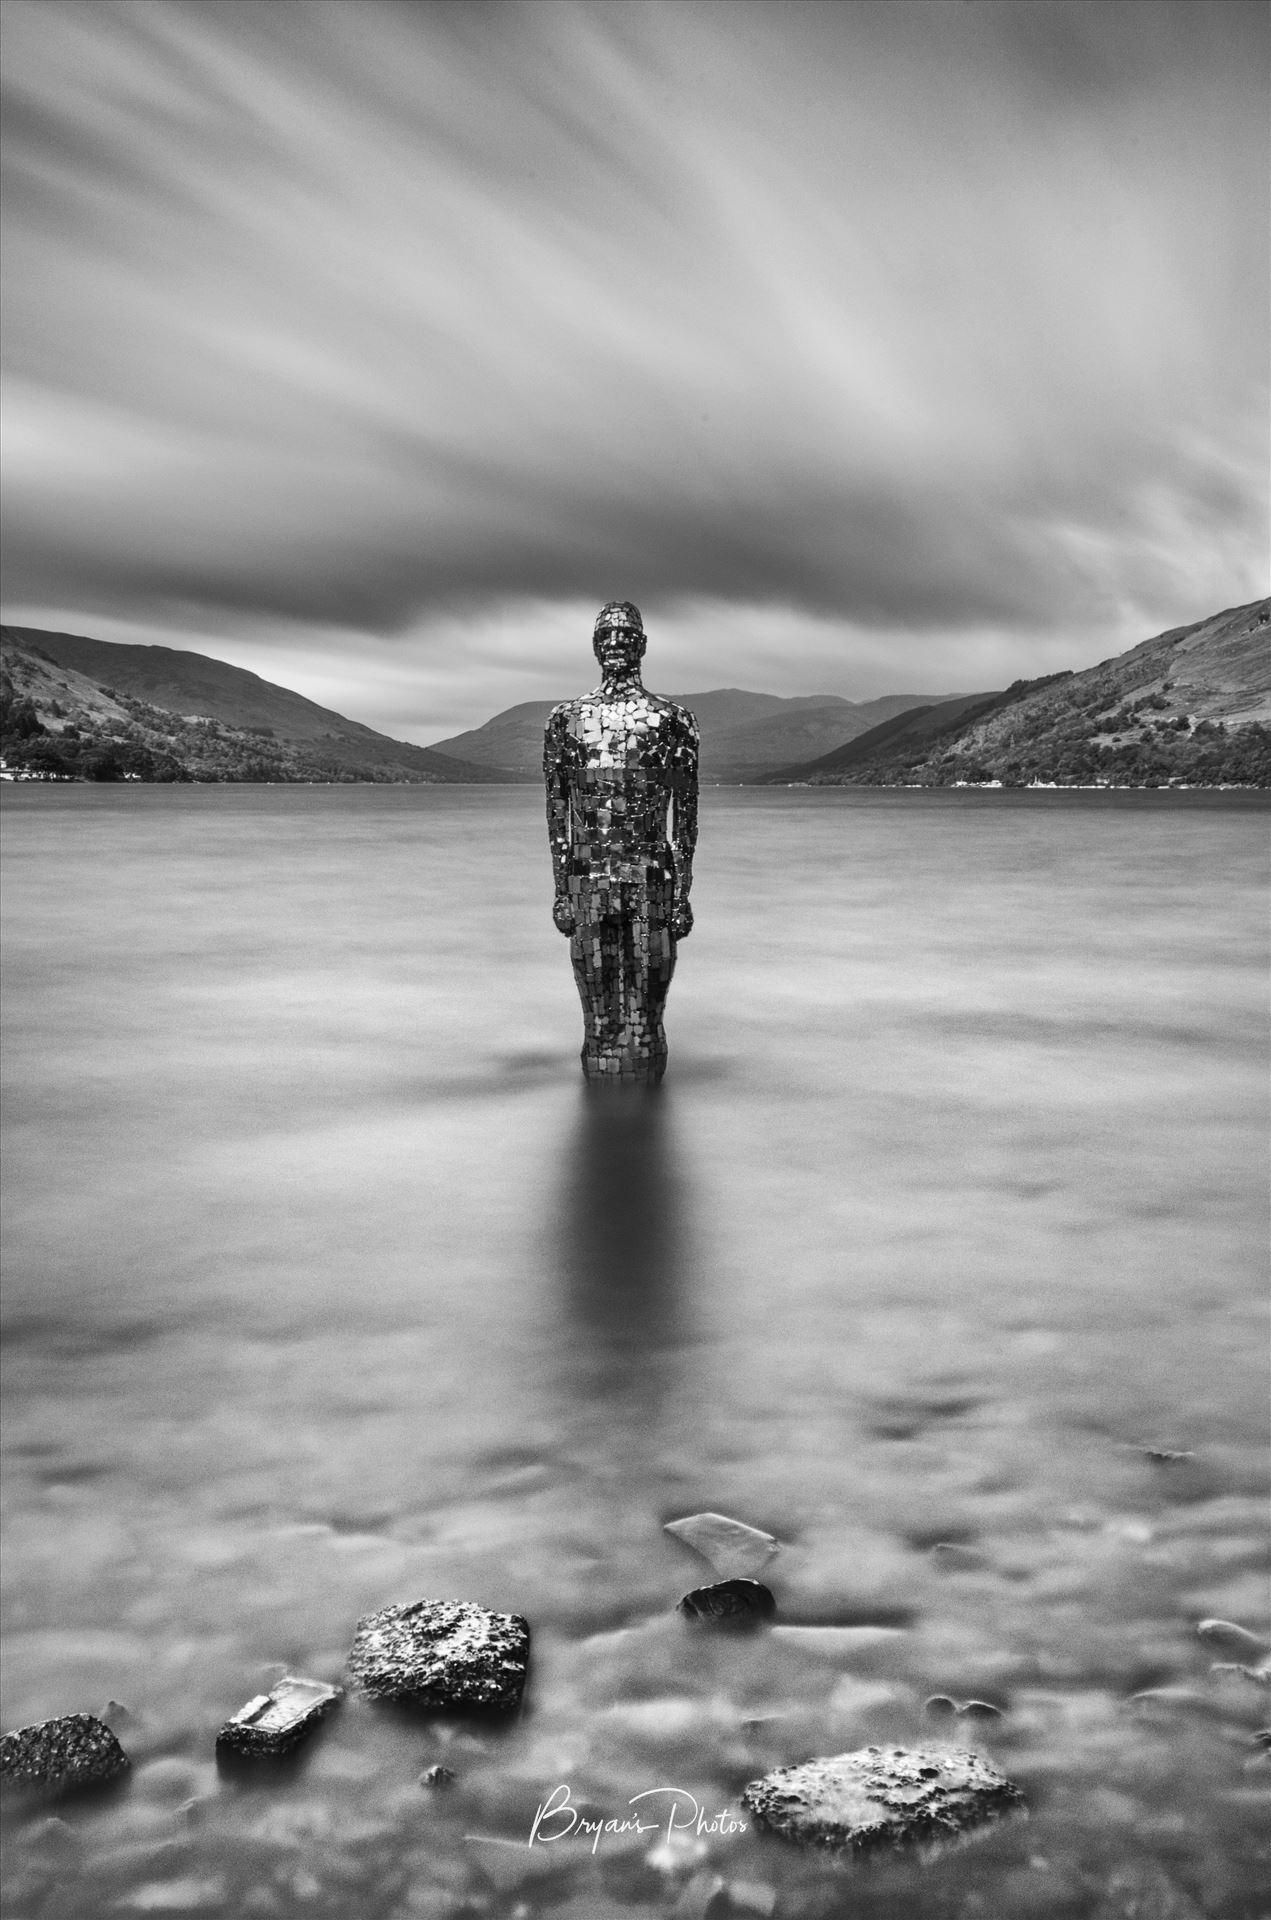 Mirror Man A black and white long exposure photograph of the still mirror man sculpture taken from St Fillans at Loch Earn. by Bryans Photos